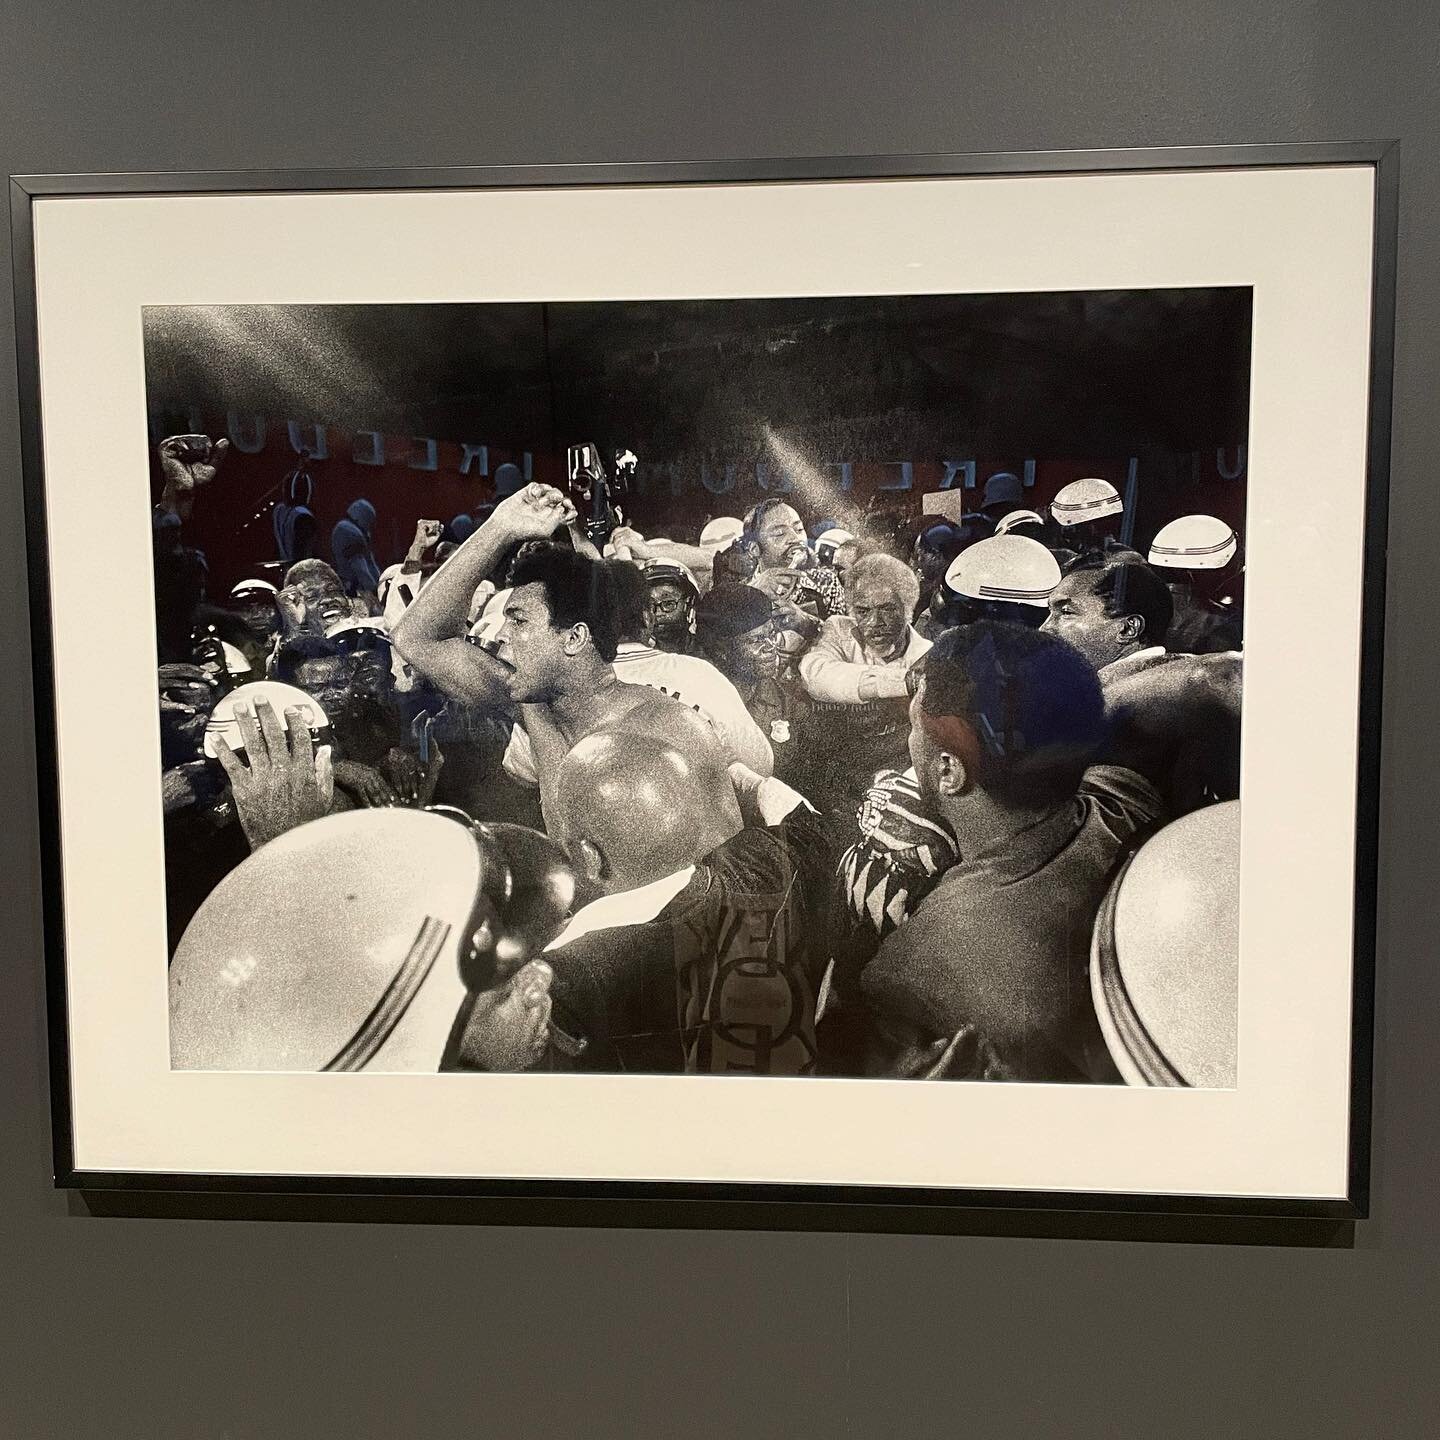 william klein exhibit today, a major inspiration: &lsquo;Street photographer. Fashion photographer. Painter. Graphic designer. Abstract photographer. Writer. Filmmaker. Book maker. Few have transformed as many fields of art and culture as William Kle